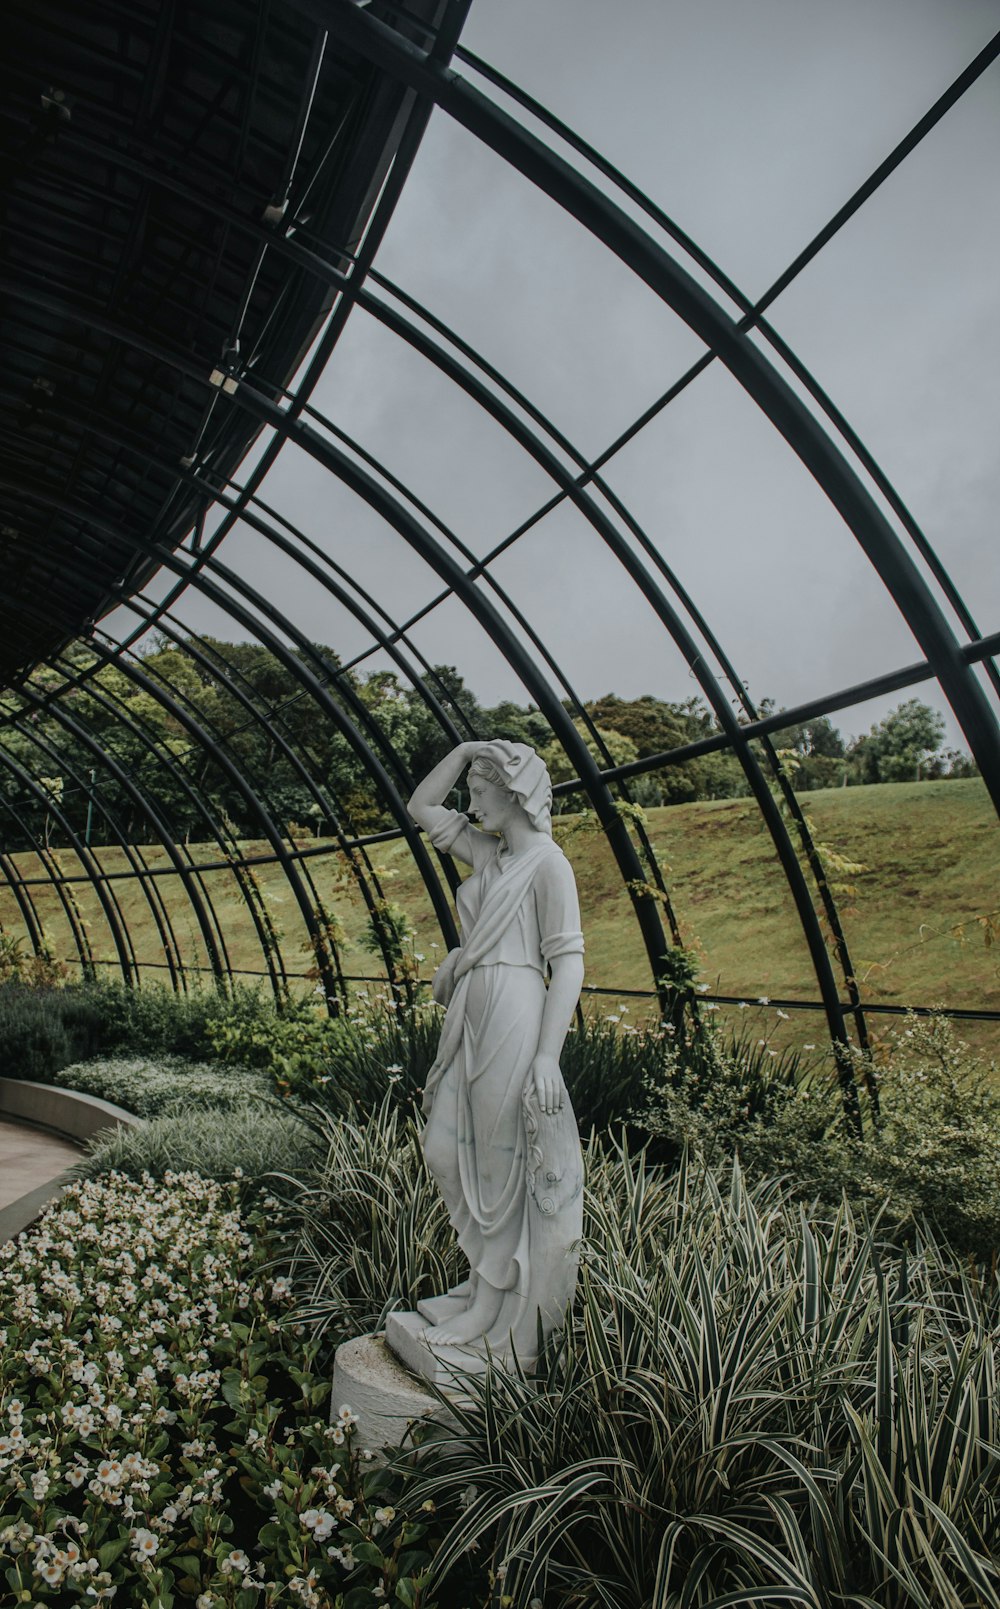 a statue of a woman standing in a garden